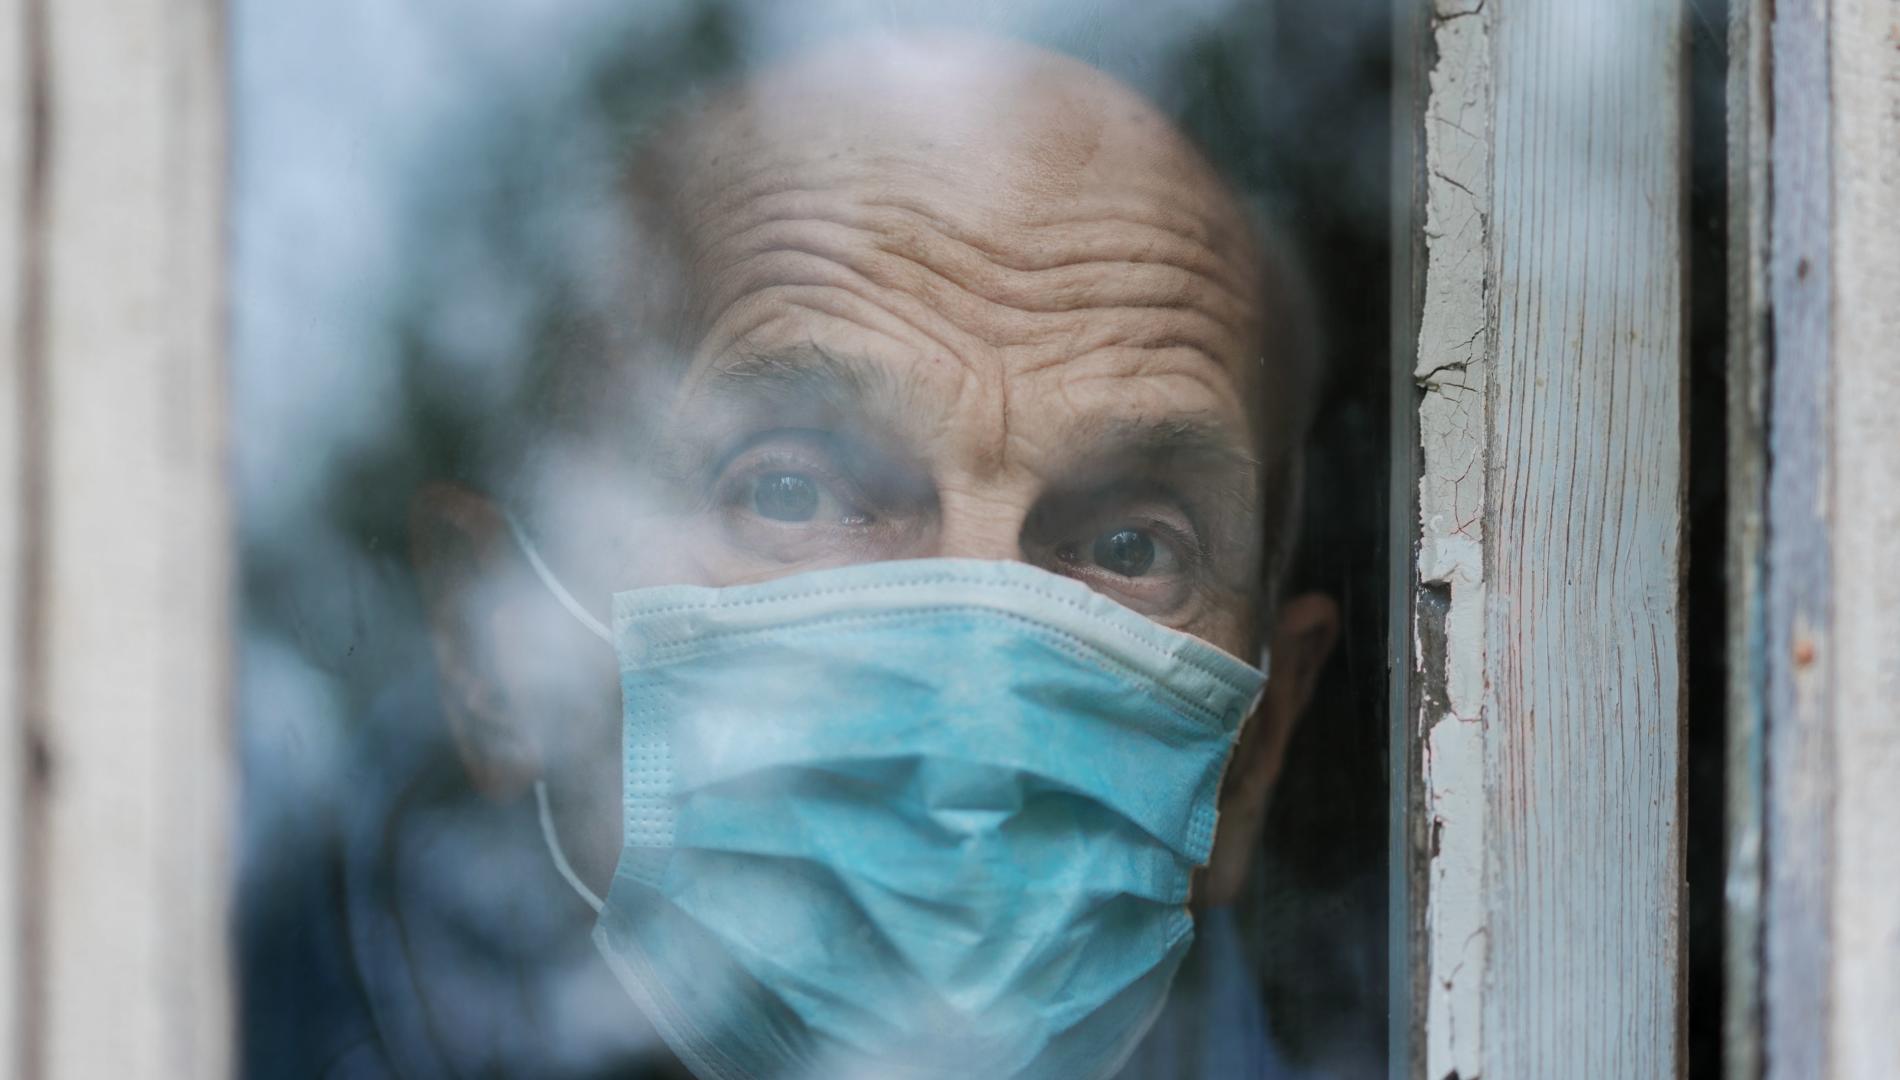 Sad-looking older man in medical face mask looking through a window